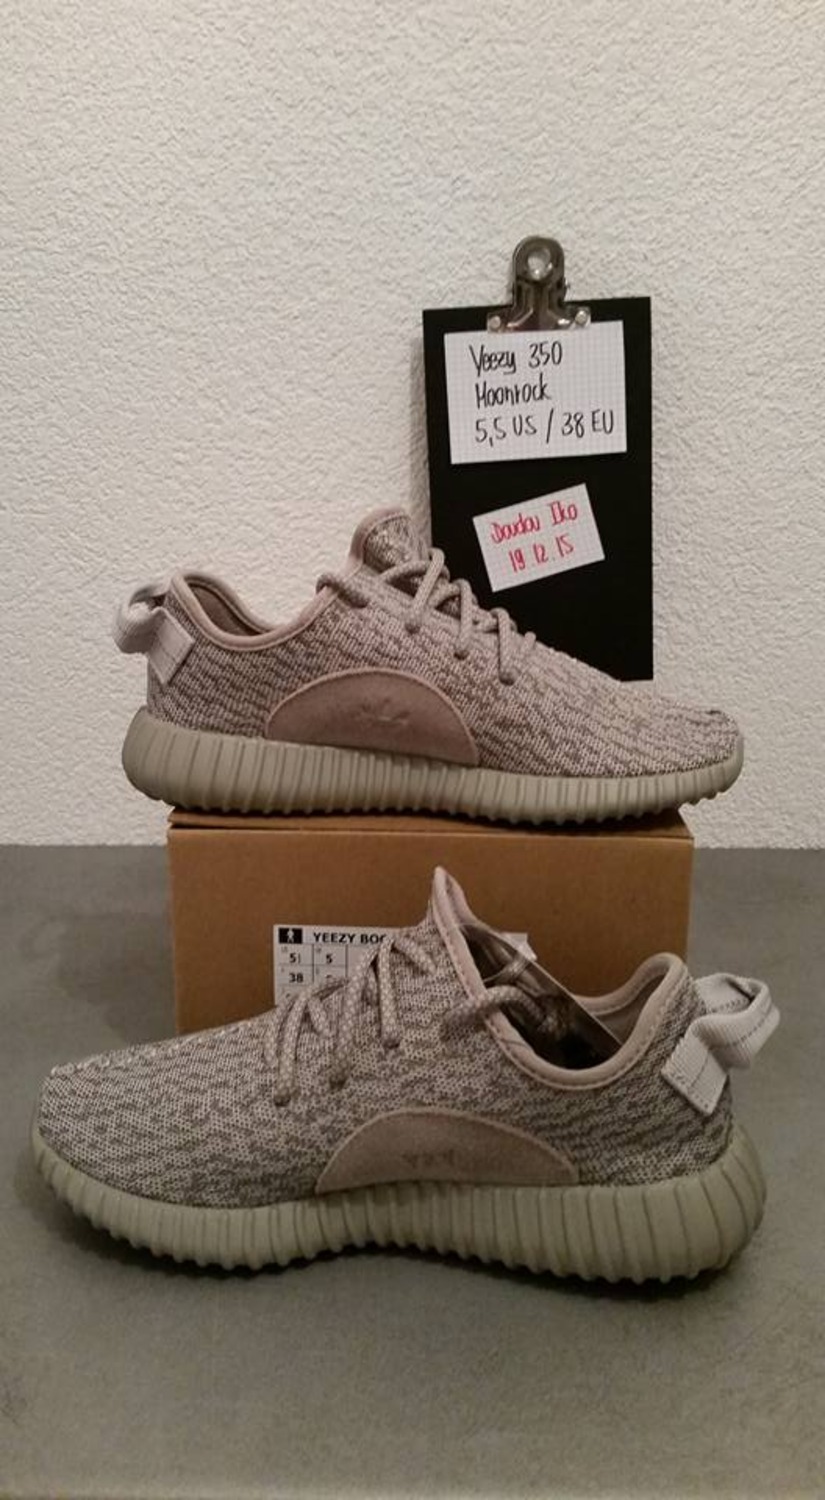 Yeezy Boost 350 Moonrock Size 10 New With Box 